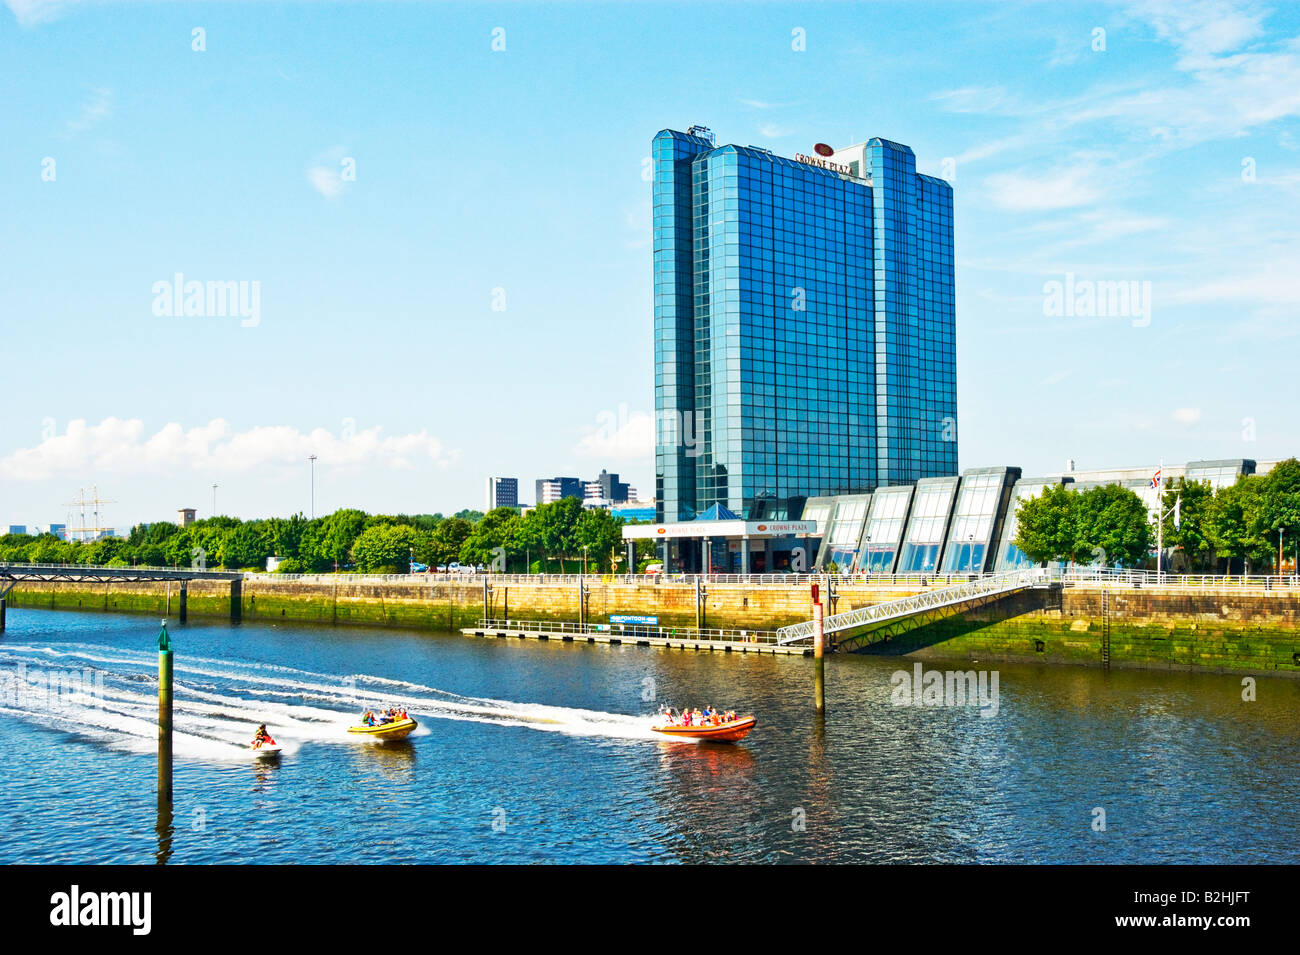 Speed boats pass by the Crowne Plaza Hotel on the River Clyde in Glasgow Scotland Stock Photo